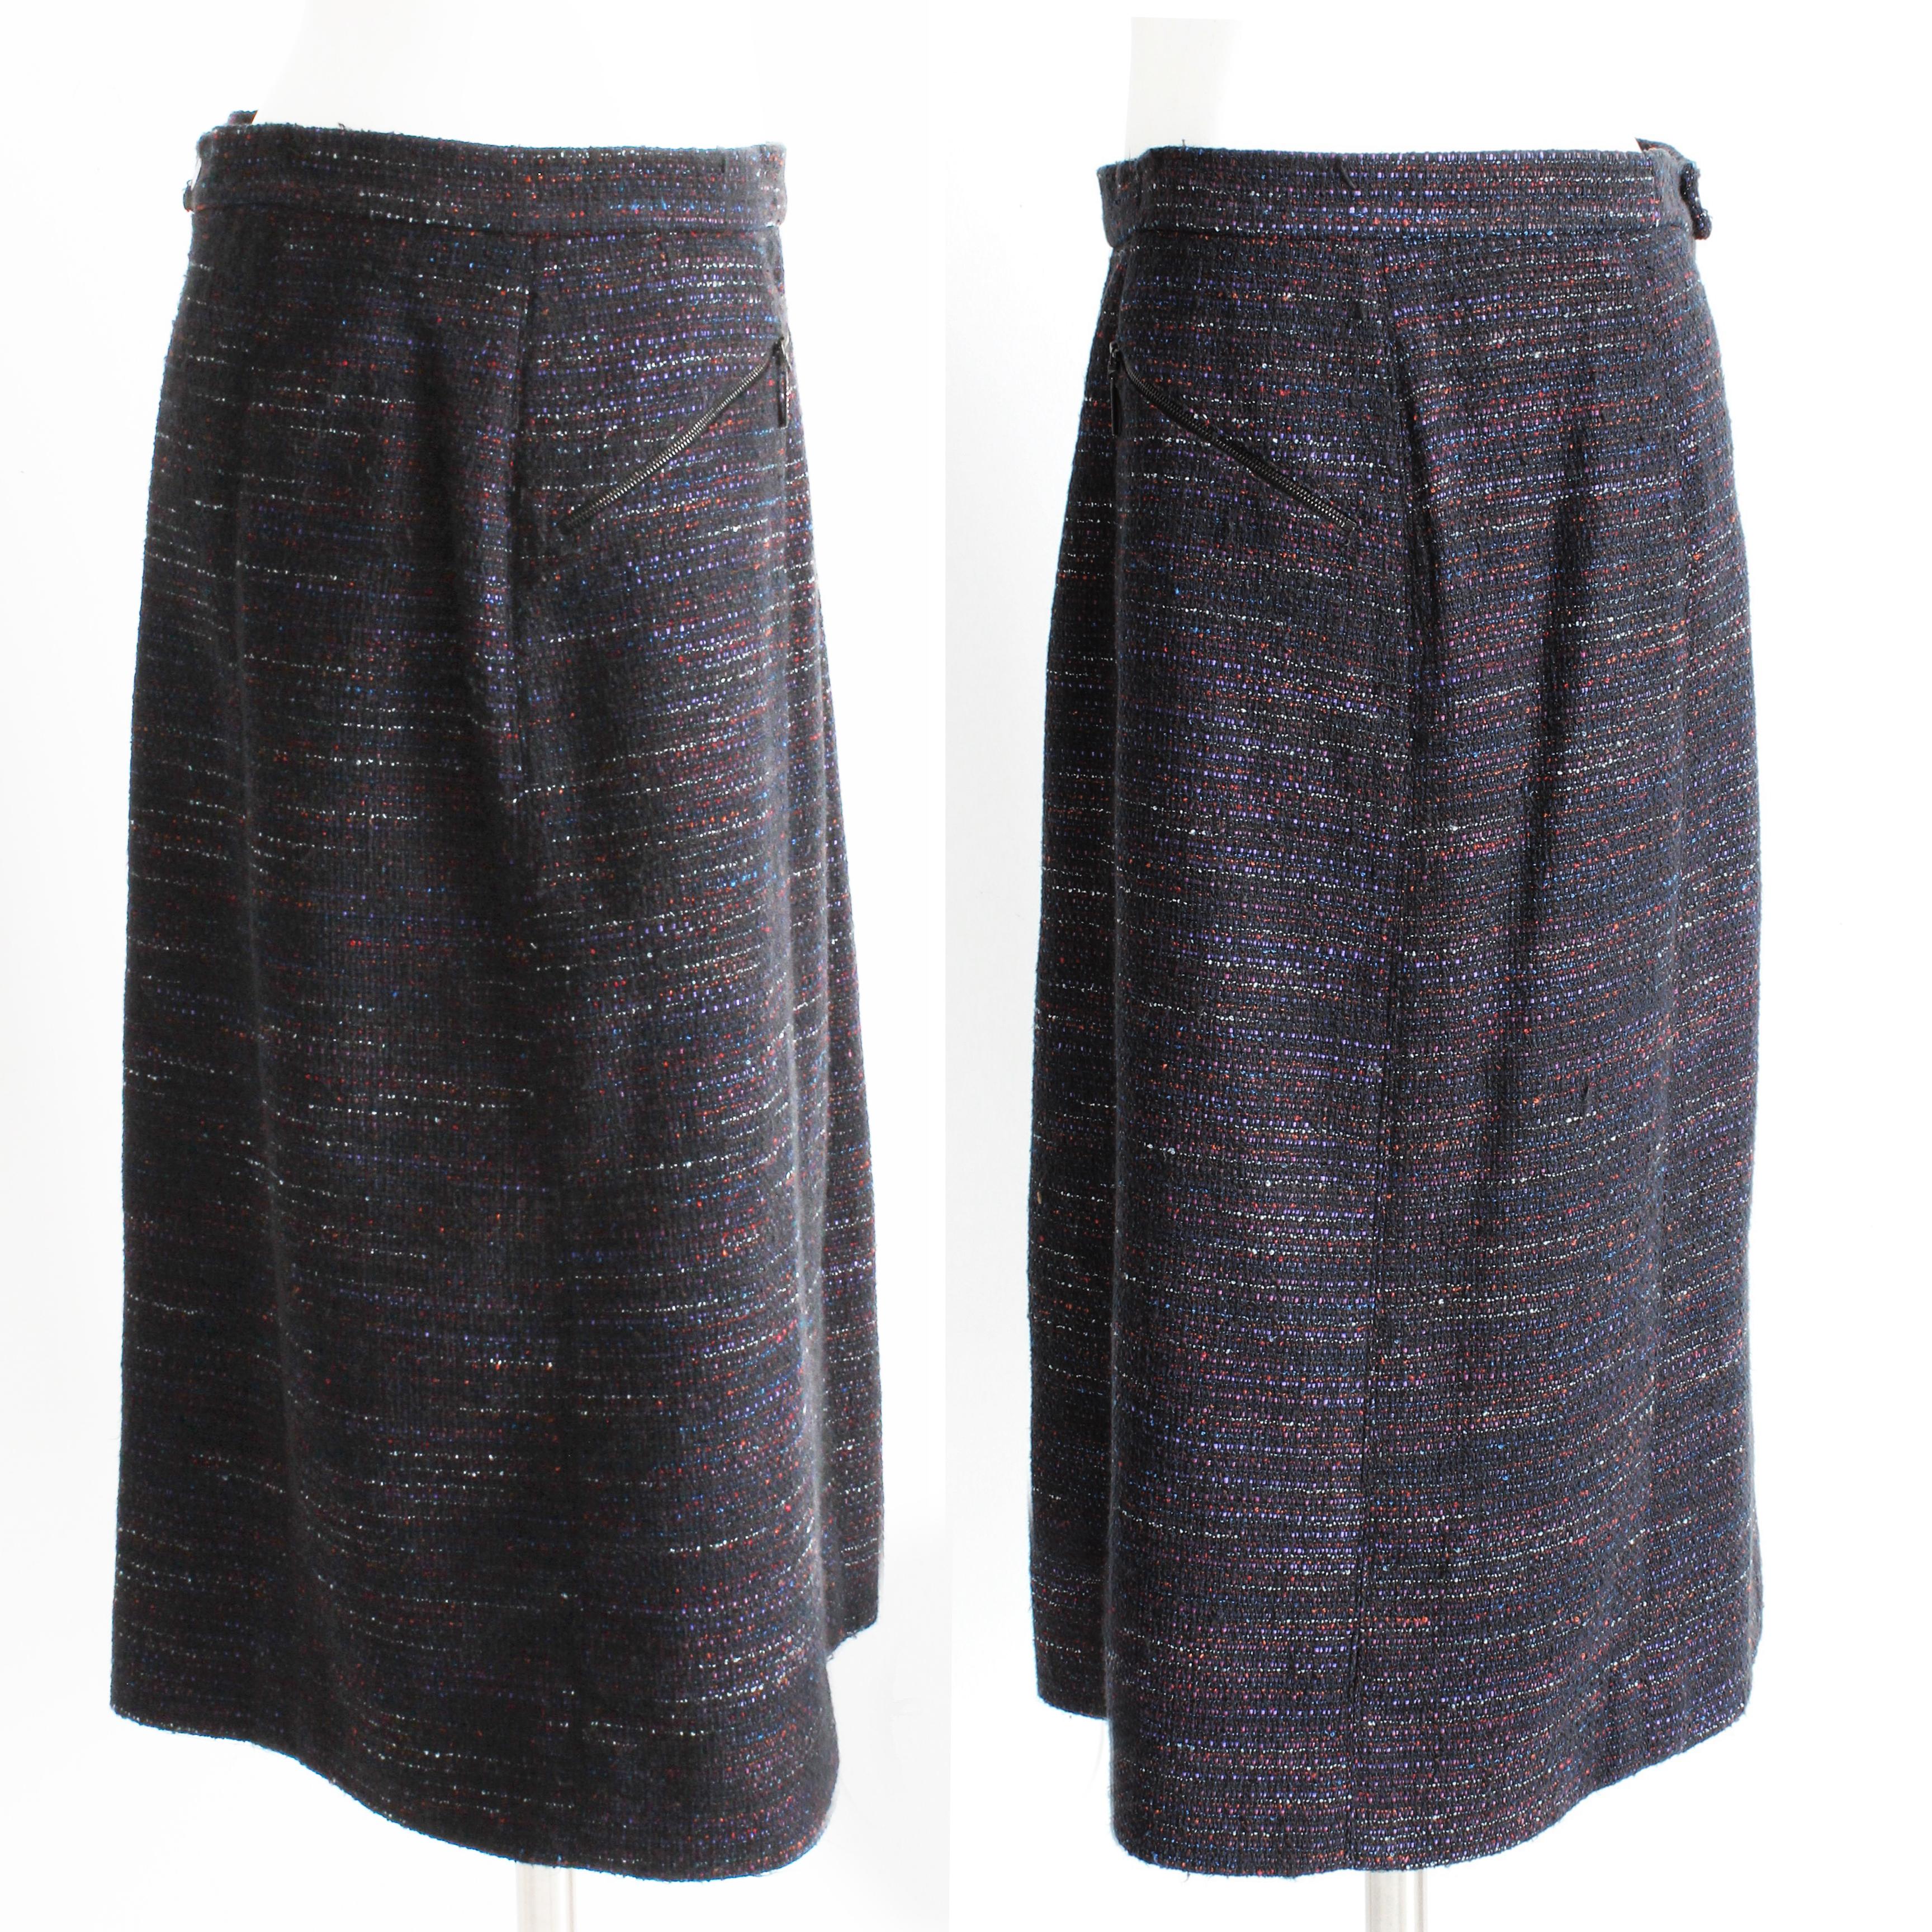 Chanel Skirt Multicolor Cotton Blend Tweed Pencil Style 02A Collection Size 40 For Sale 2